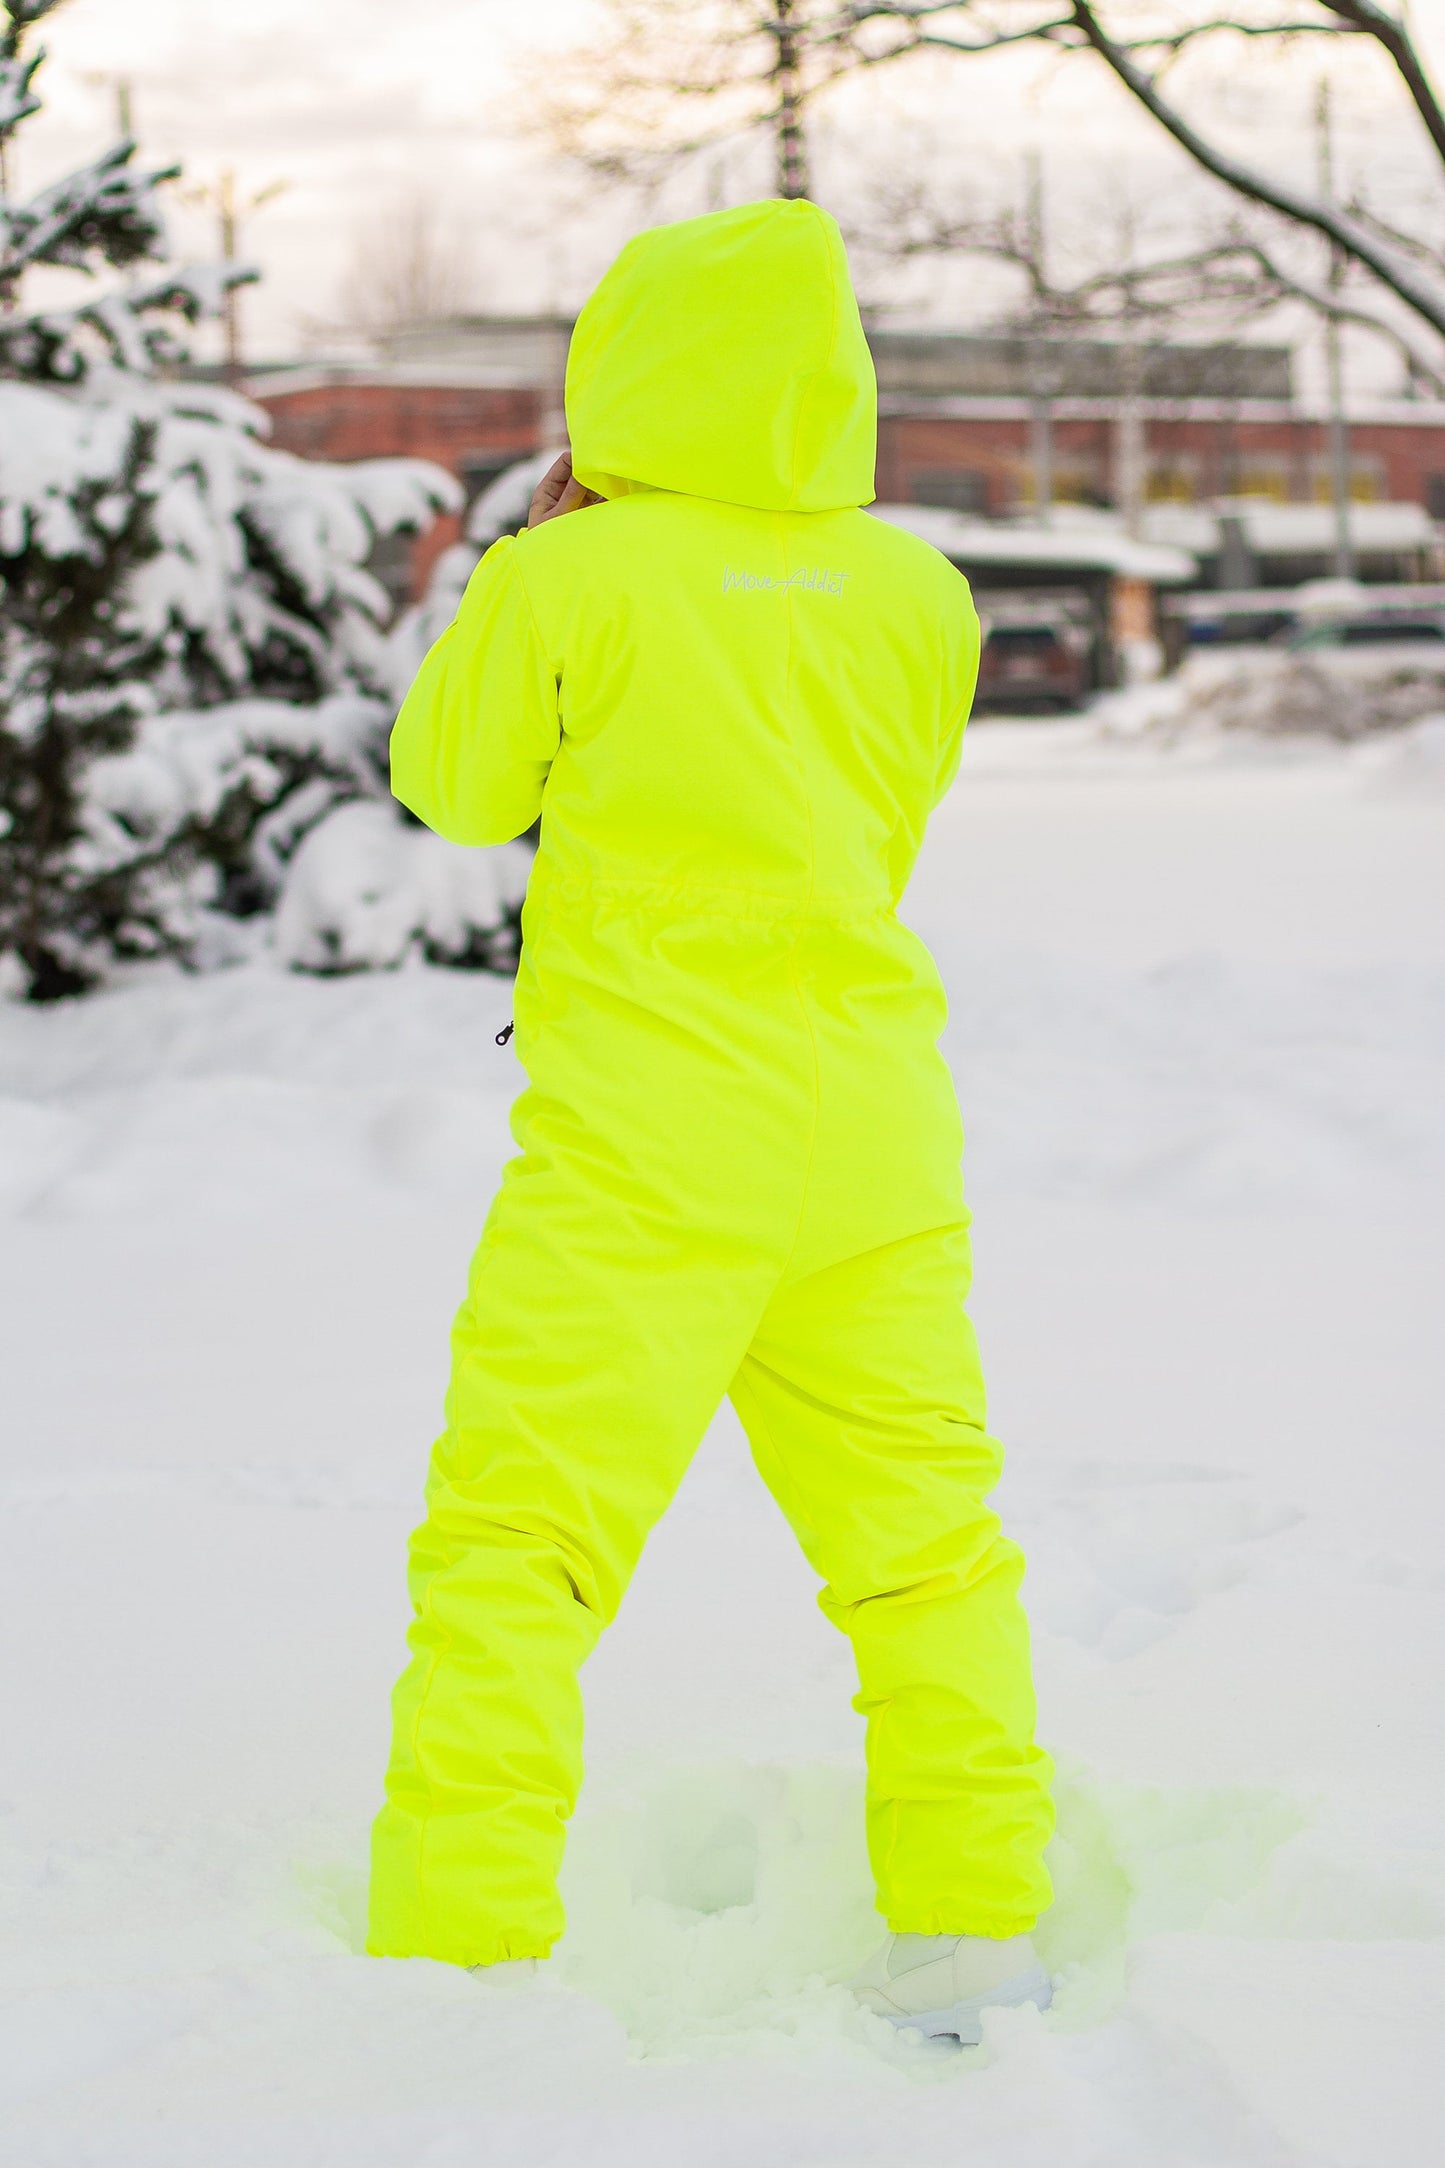 Neon Yellow Onesie Jumpsuit, snowboard clothes, Snowboard suit, Skiing Overall, ski suit women, sportswear, Jumpsuit winter, Colorful Snow